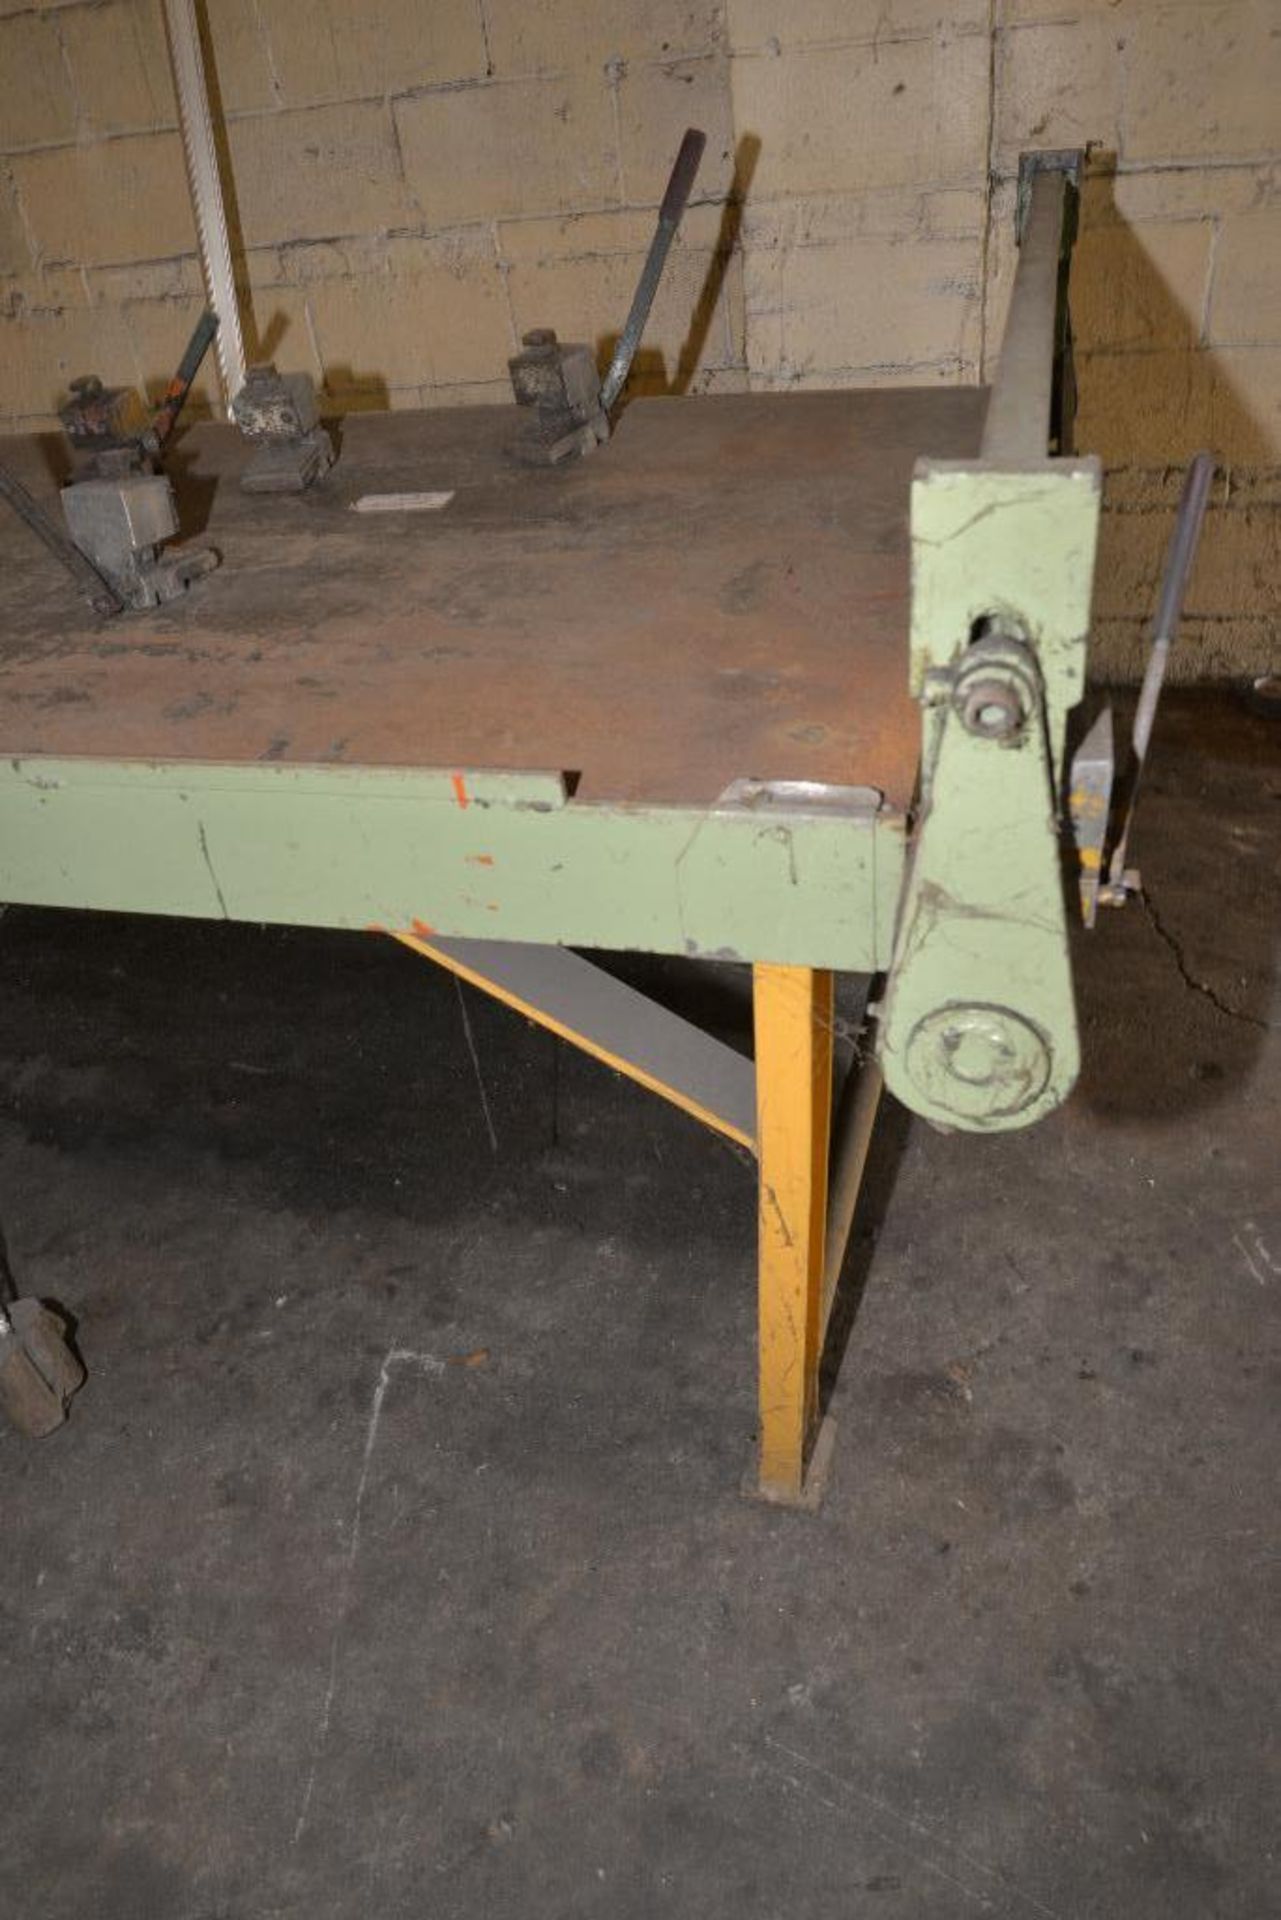 ENGEL SHOP MASTER MD. 101A-3-DM DUCT MACHINE S/N 22788-1 - STEEL TABLE - 2 ELECTRONIC MAGNETS - - Image 4 of 13